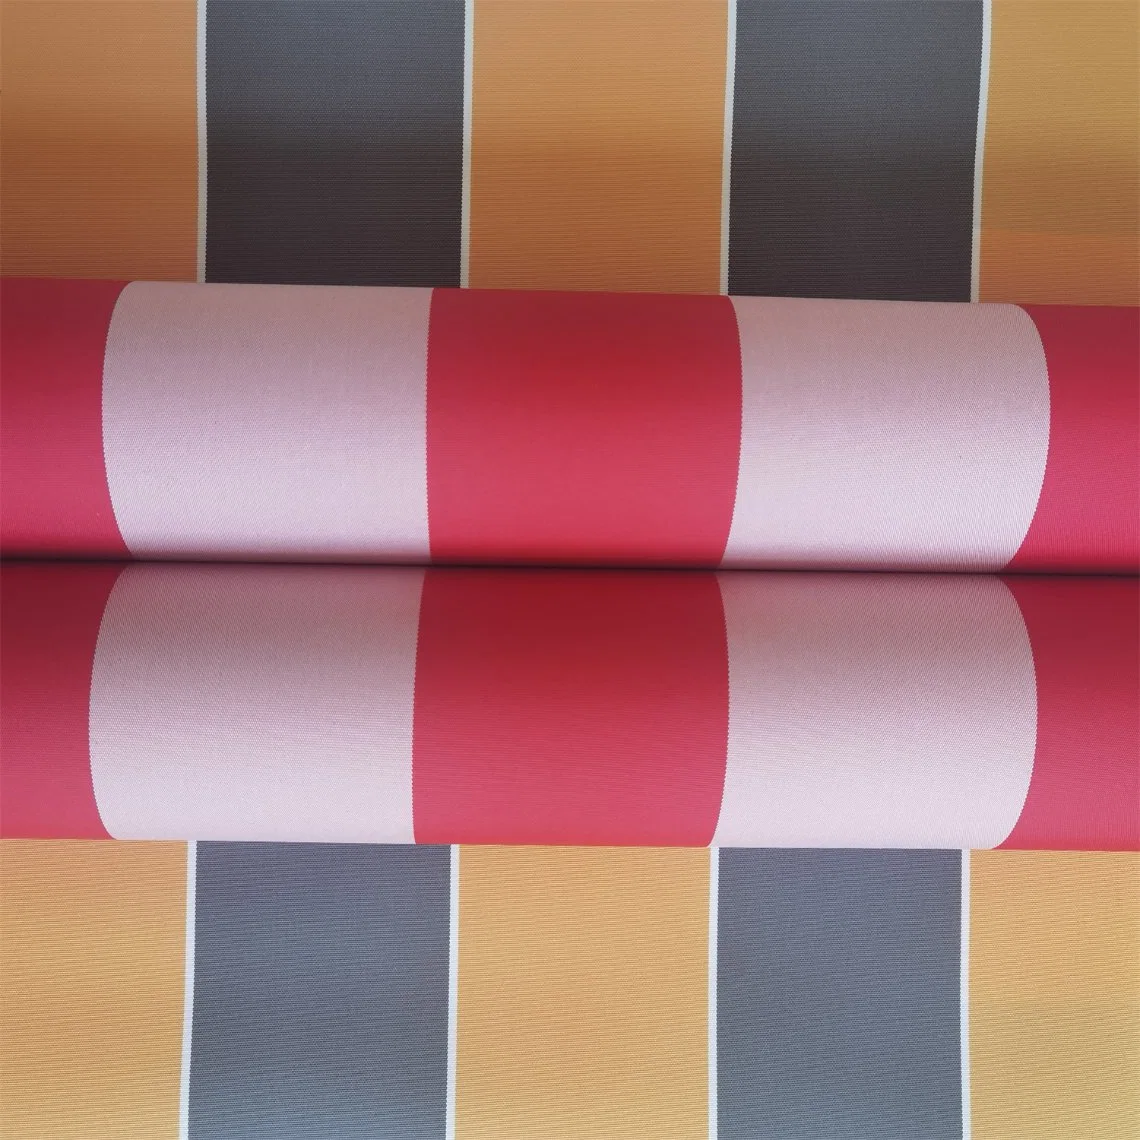 Outdoor Seat Fabric 100 Solution Dyed Acrylic Plain Waterproof